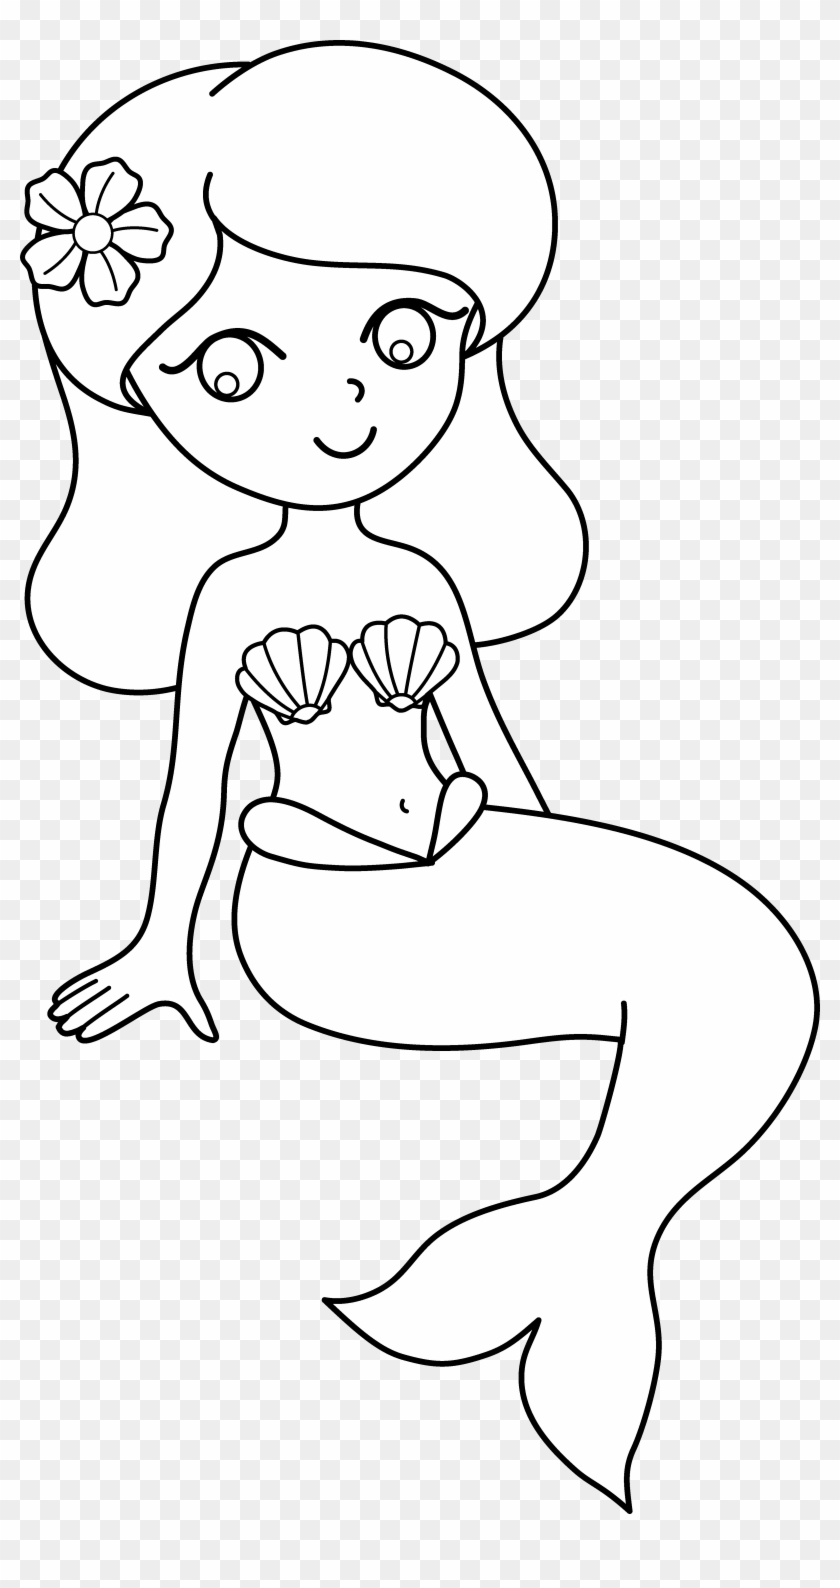 10 Pics Of Cute Mermaid Coloring Pages - Cartoon Clipart #5944534